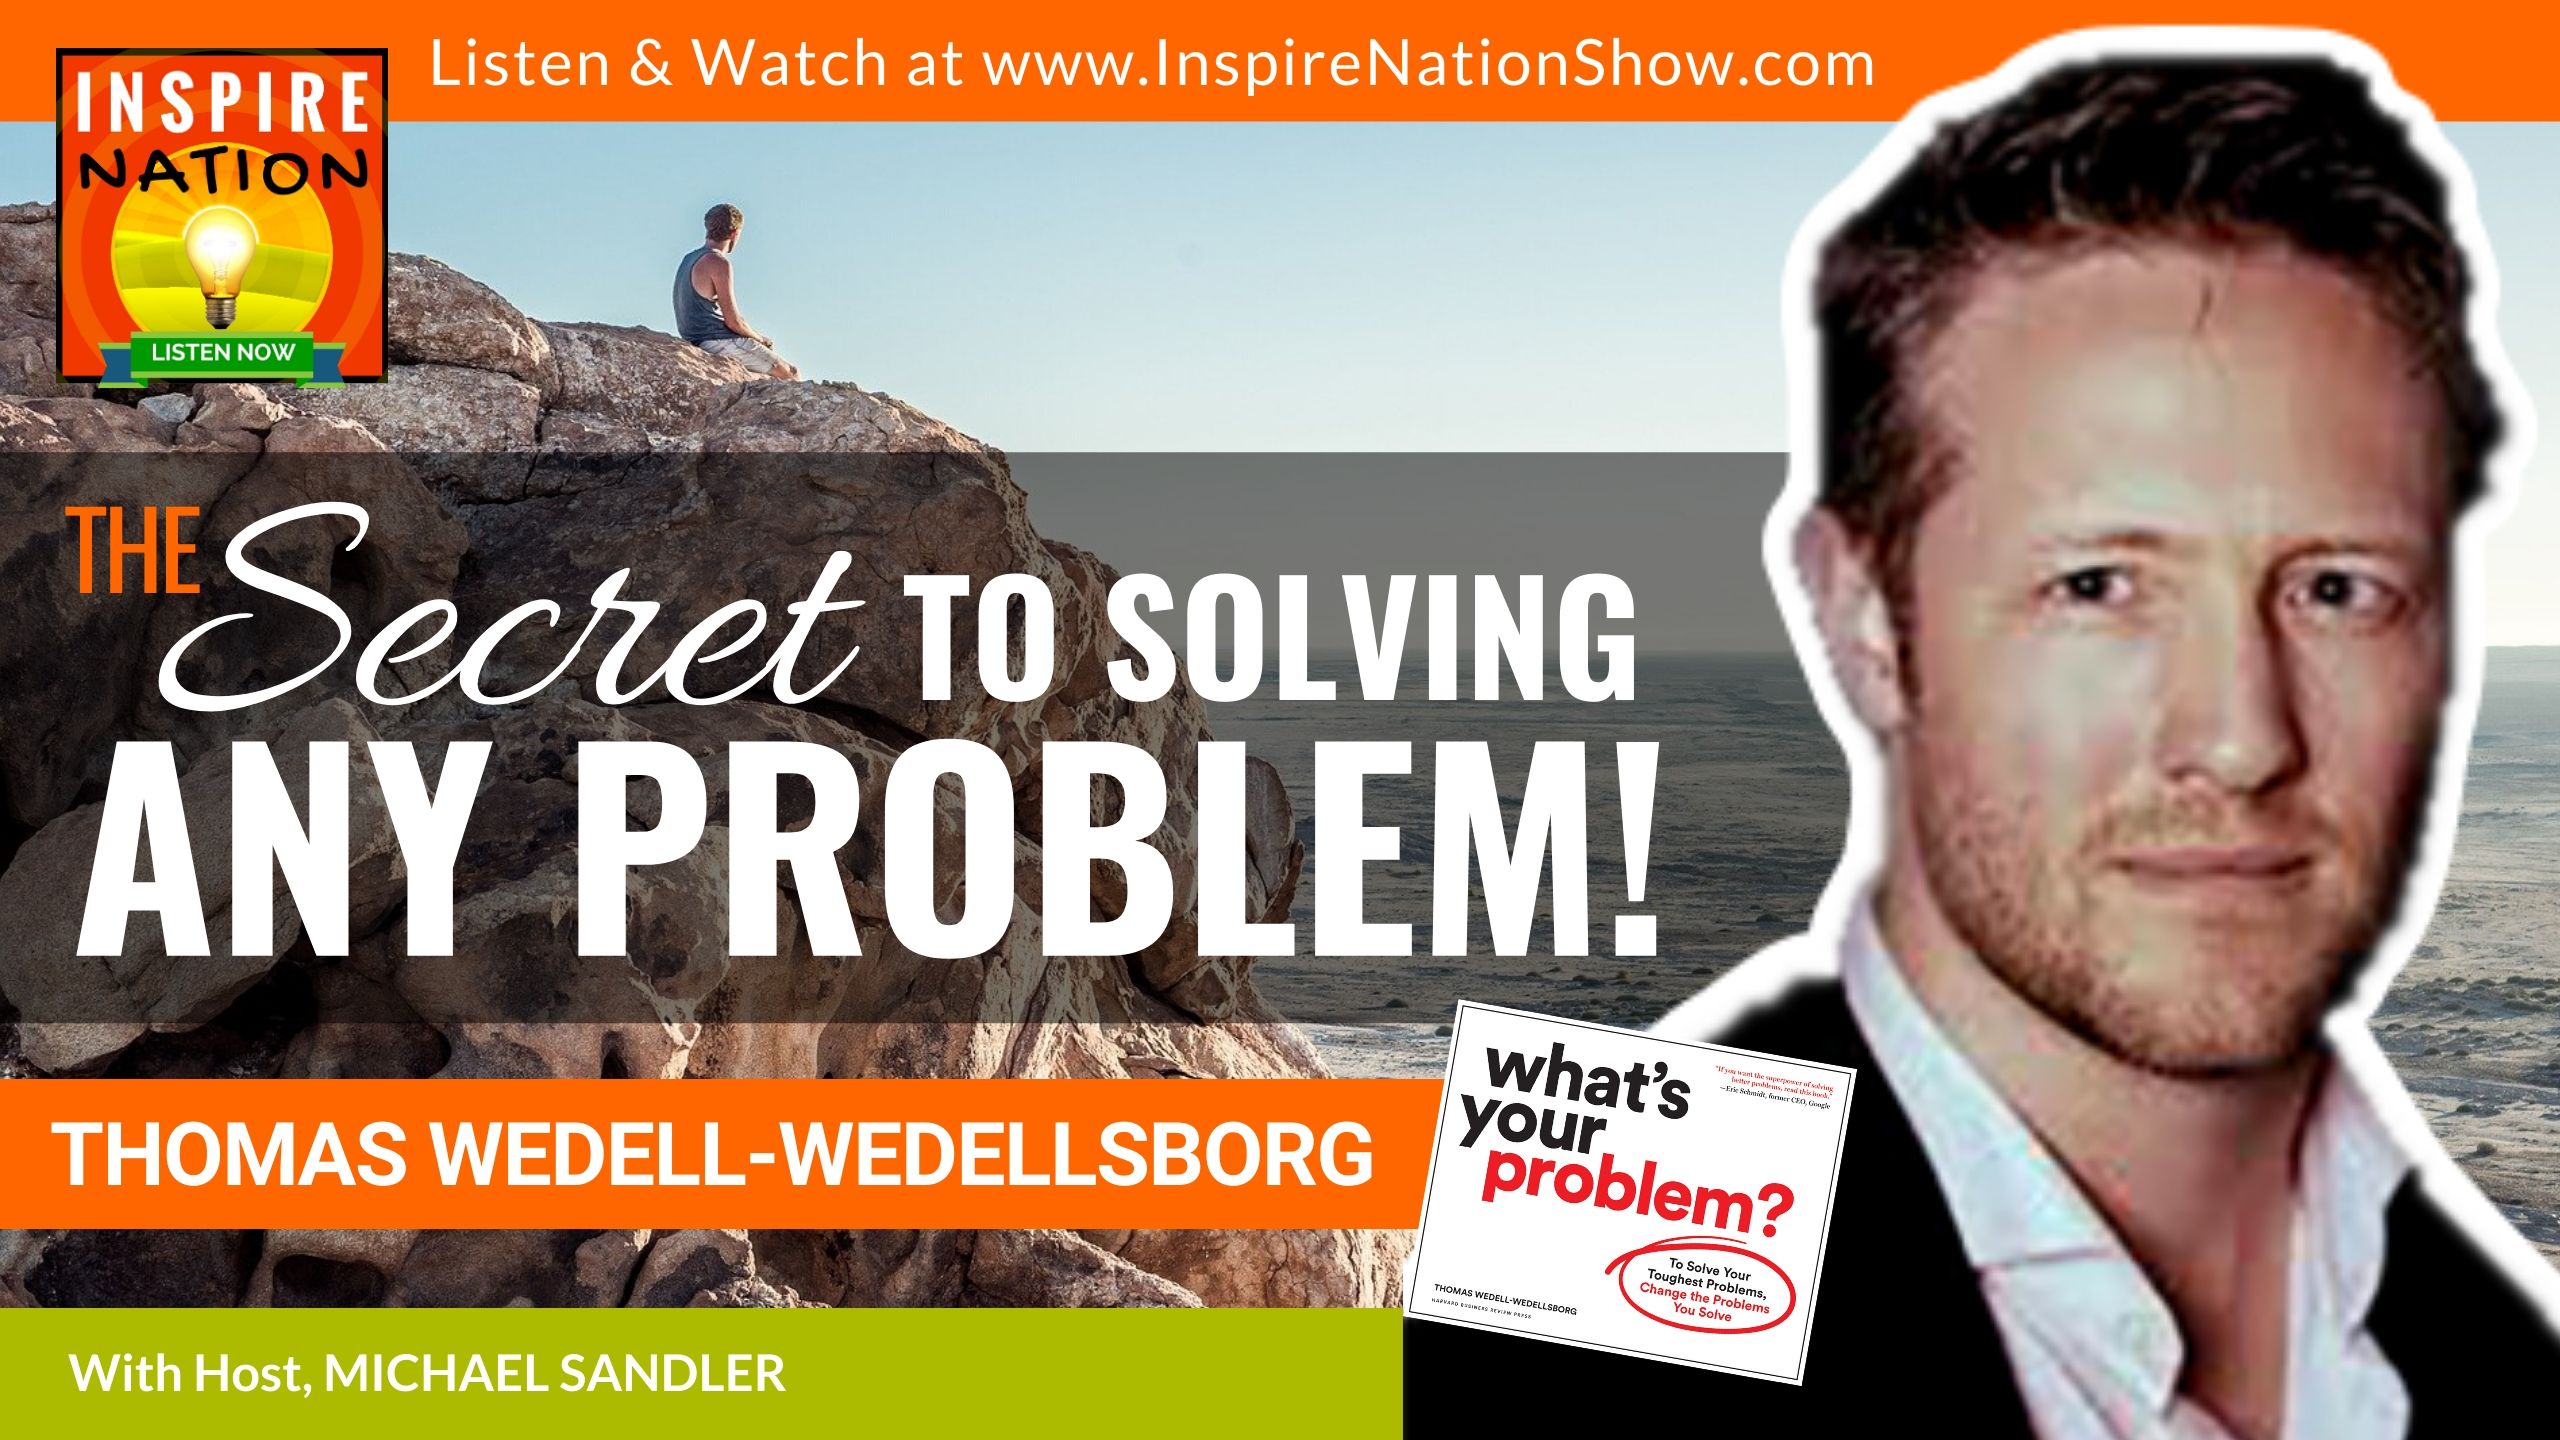 Michael Sandler interviews Thomas Wedell-Wedellsborg on "What's Your Problem?" and solving the correct problem!